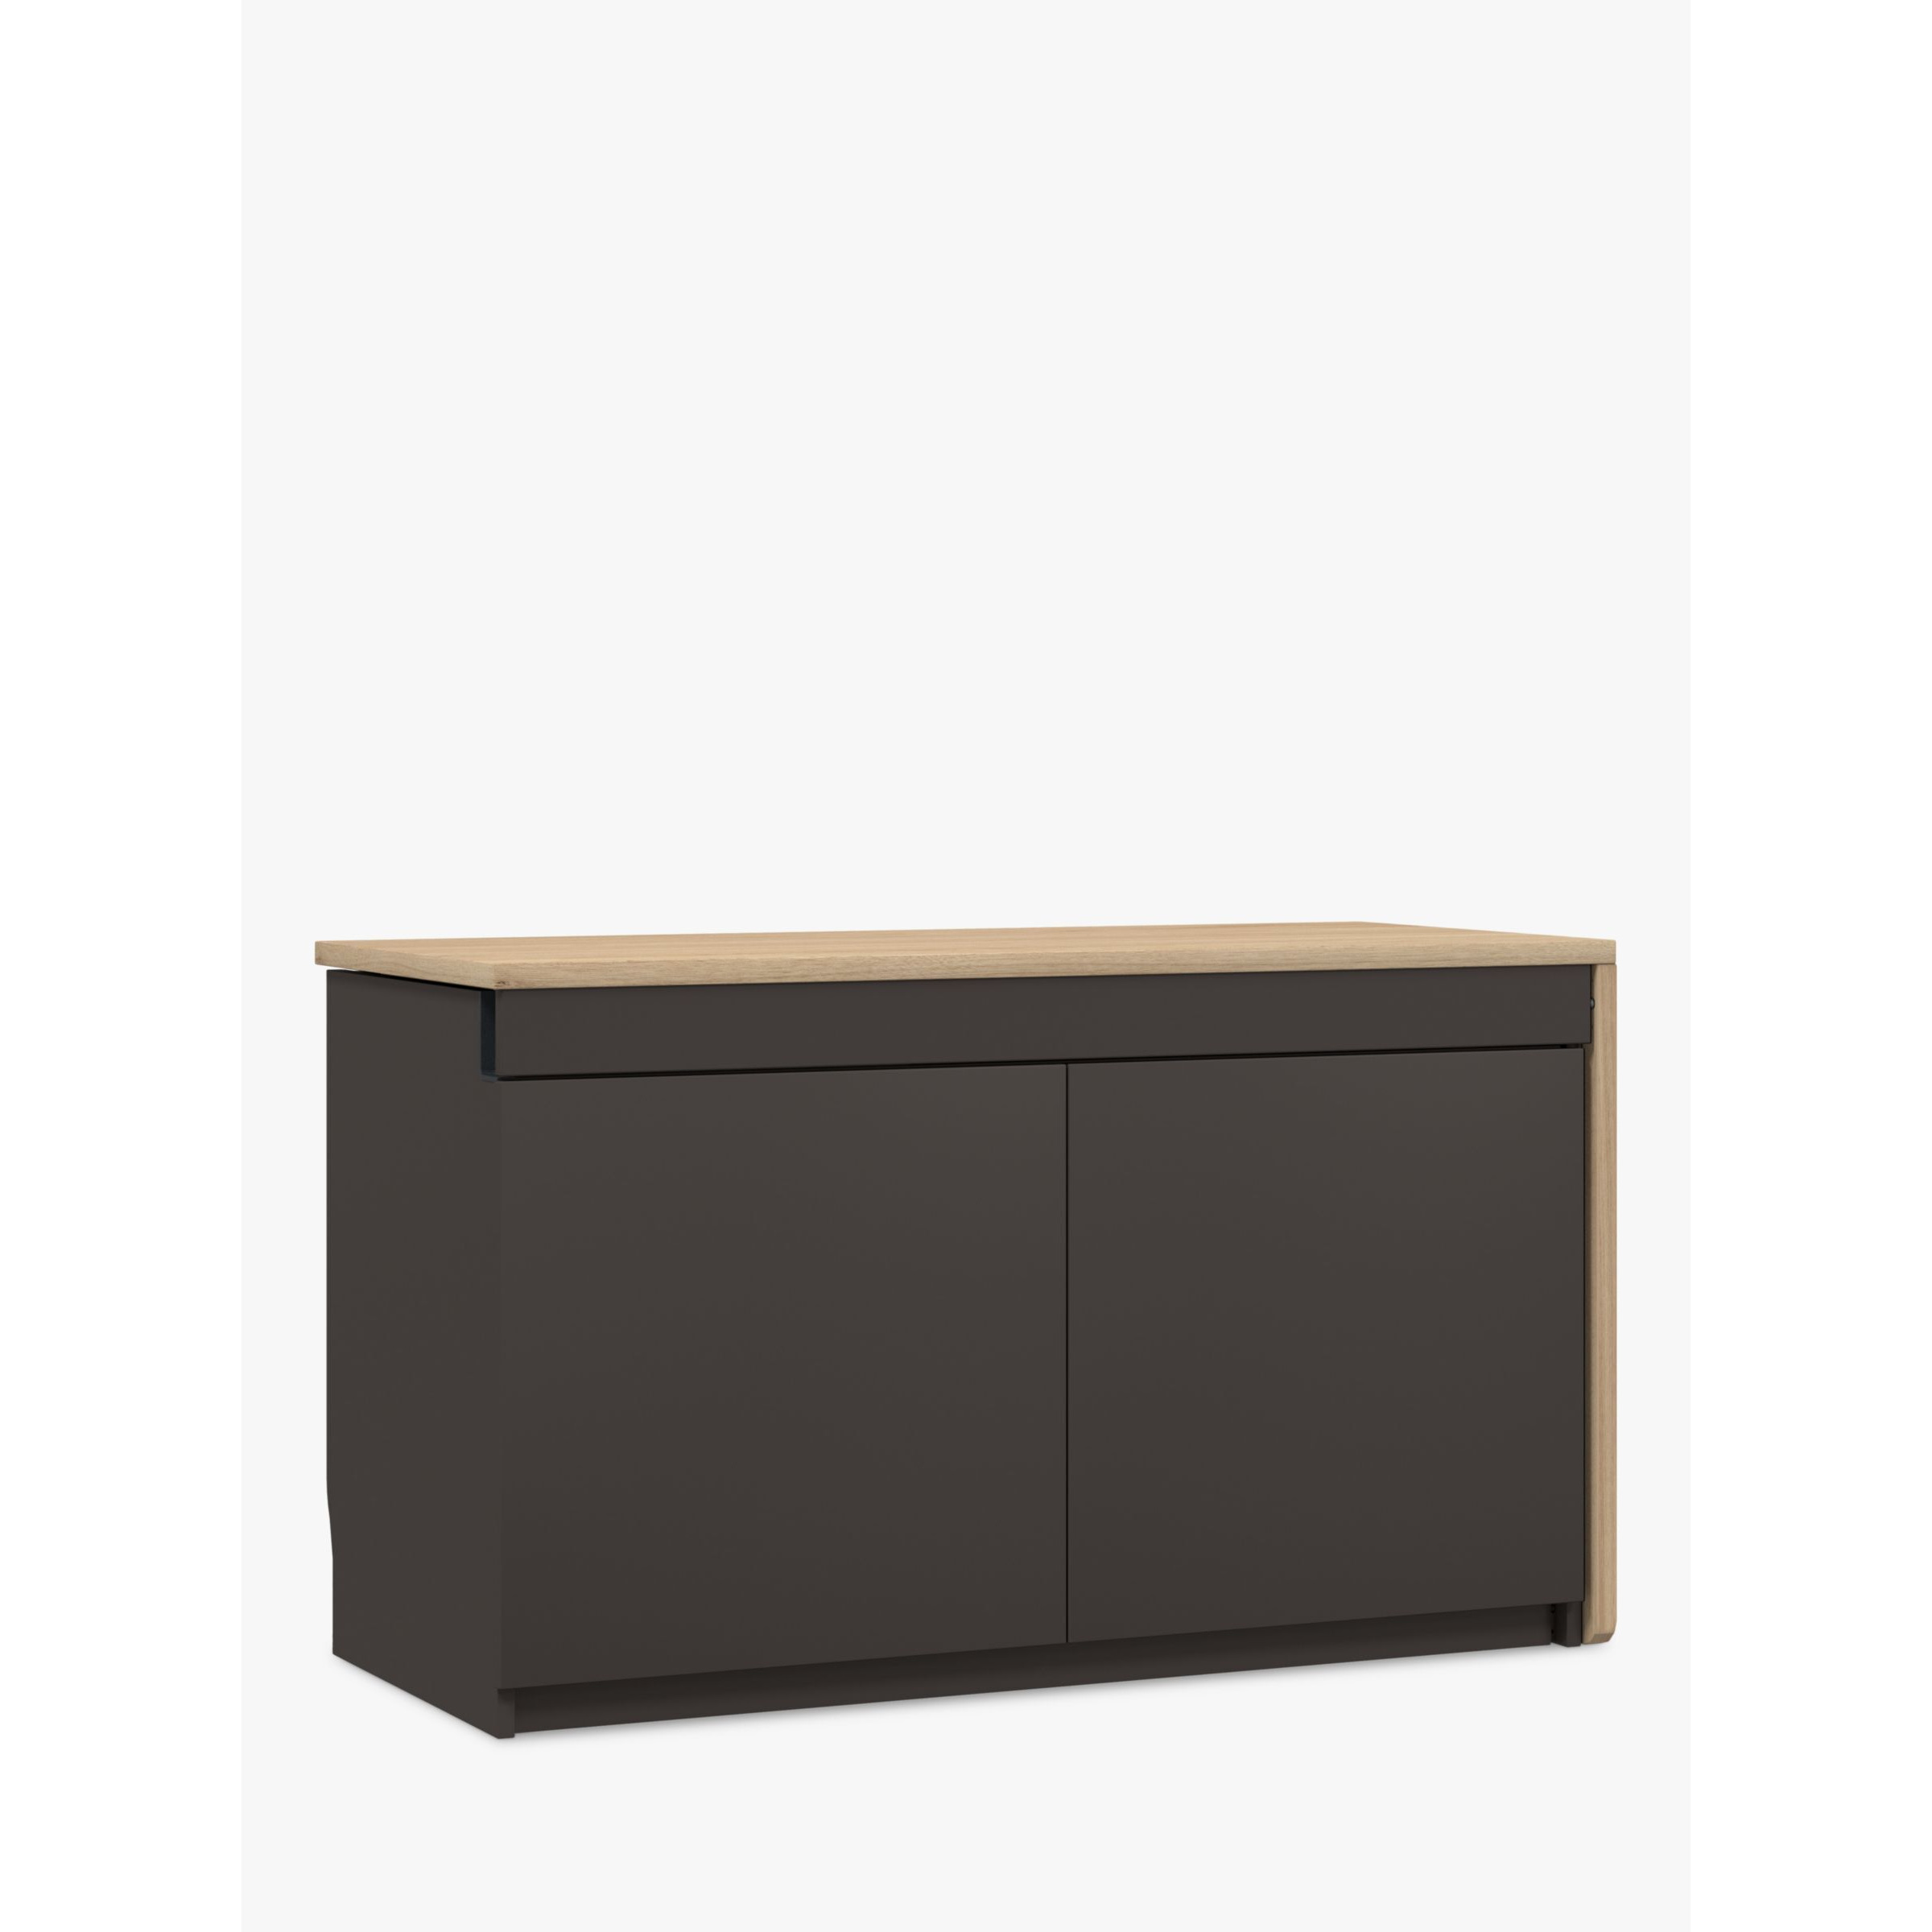 Bisley Hideaway Swing Sideboard with Right Hand Desk & Power Sockets - image 1